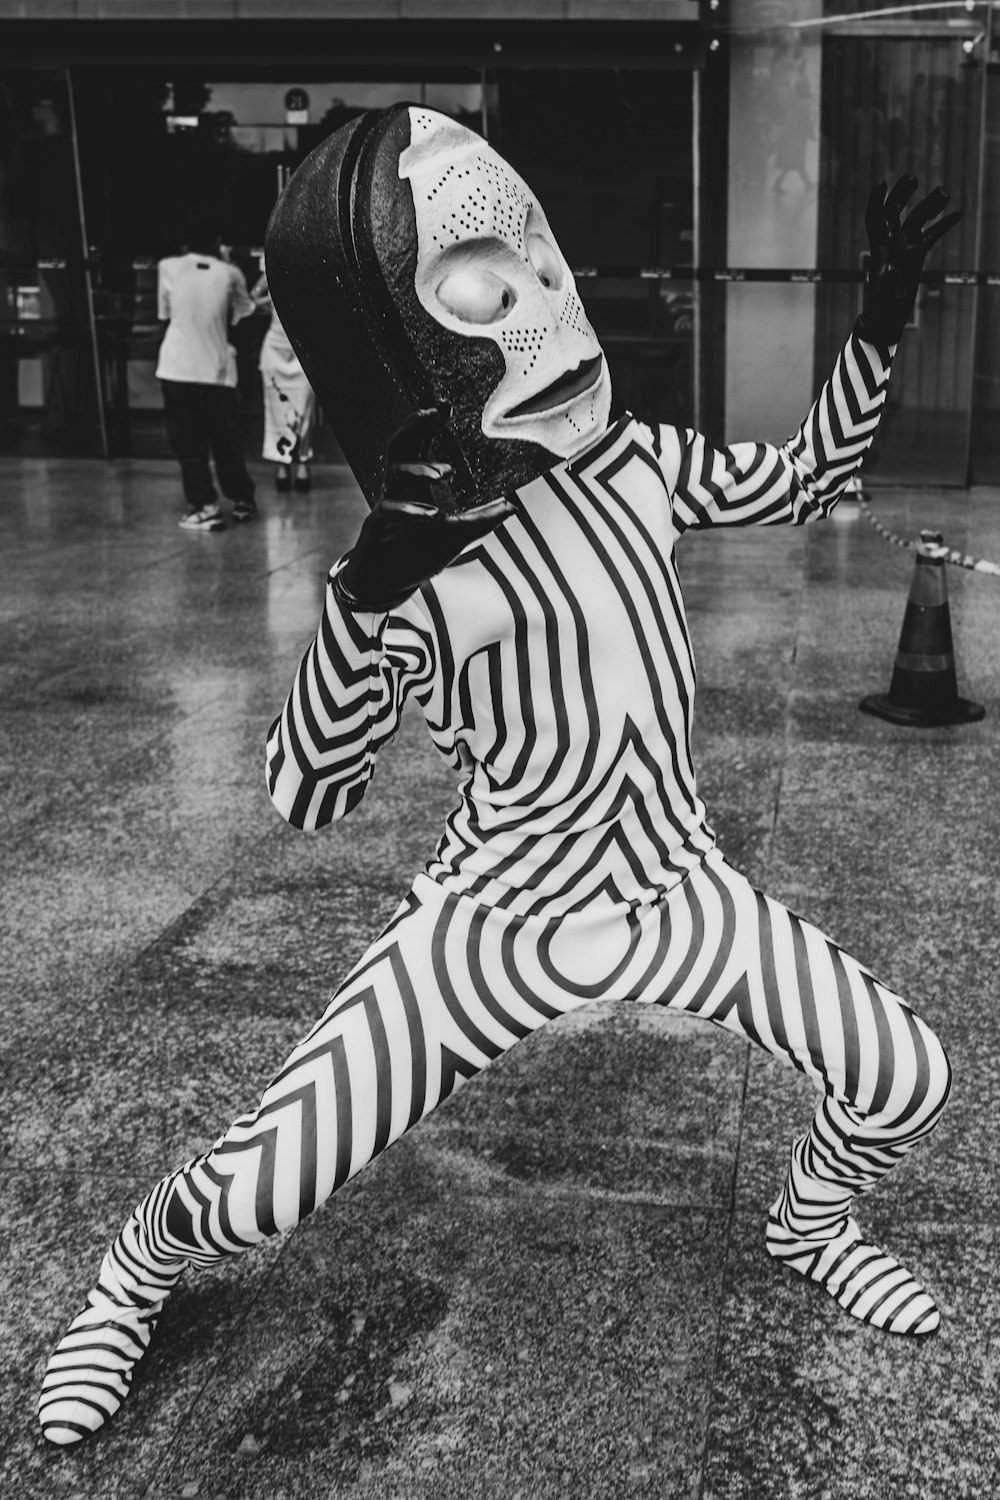 a person in a zebra suit and a helmet